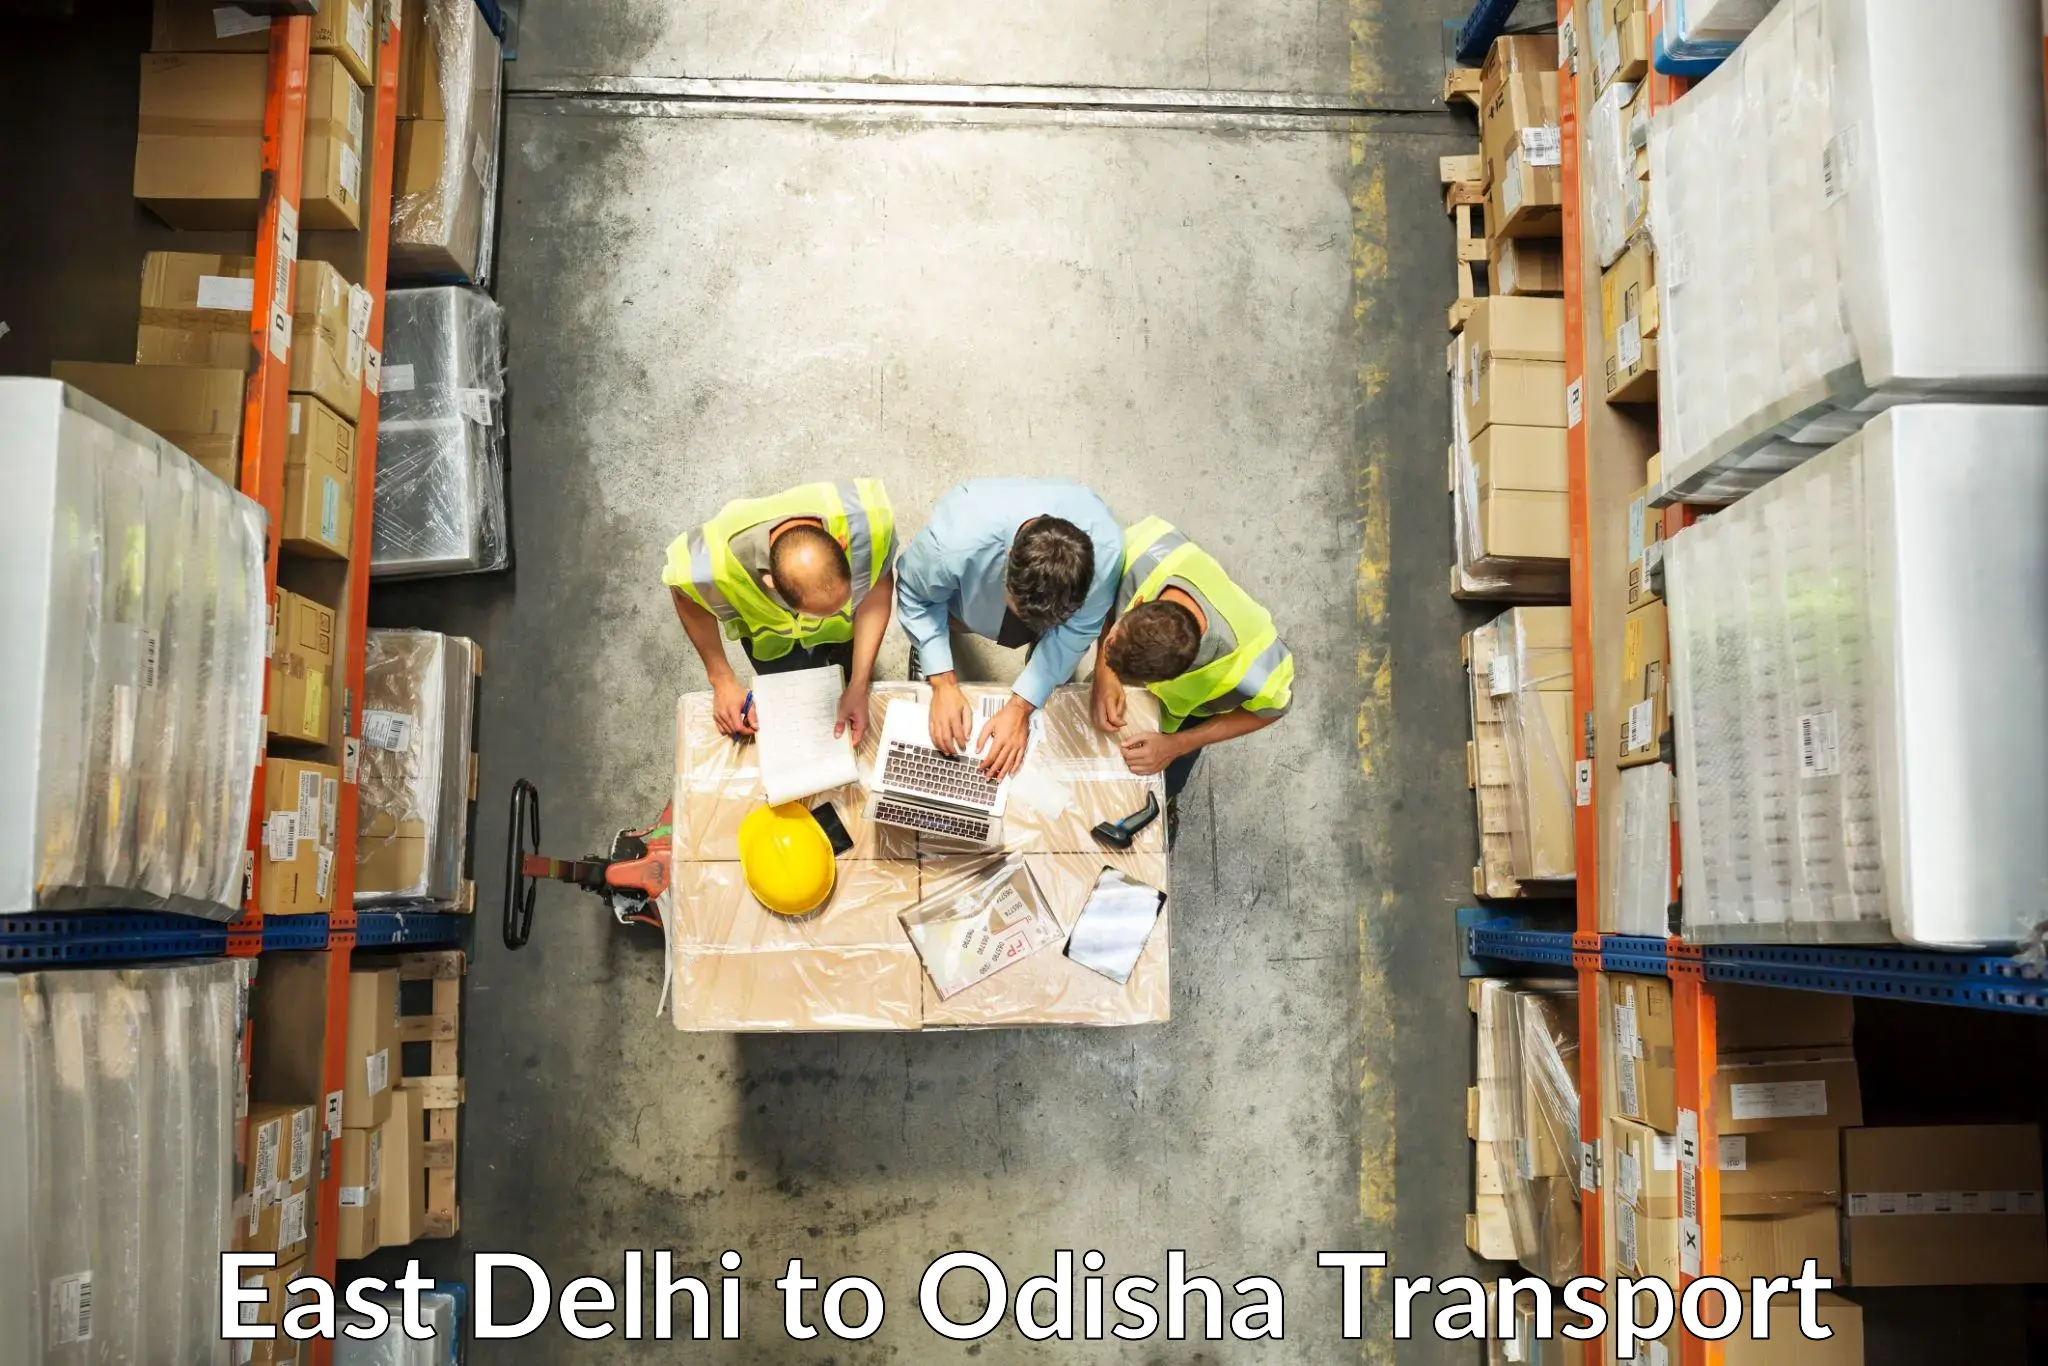 Air cargo transport services East Delhi to Mathili